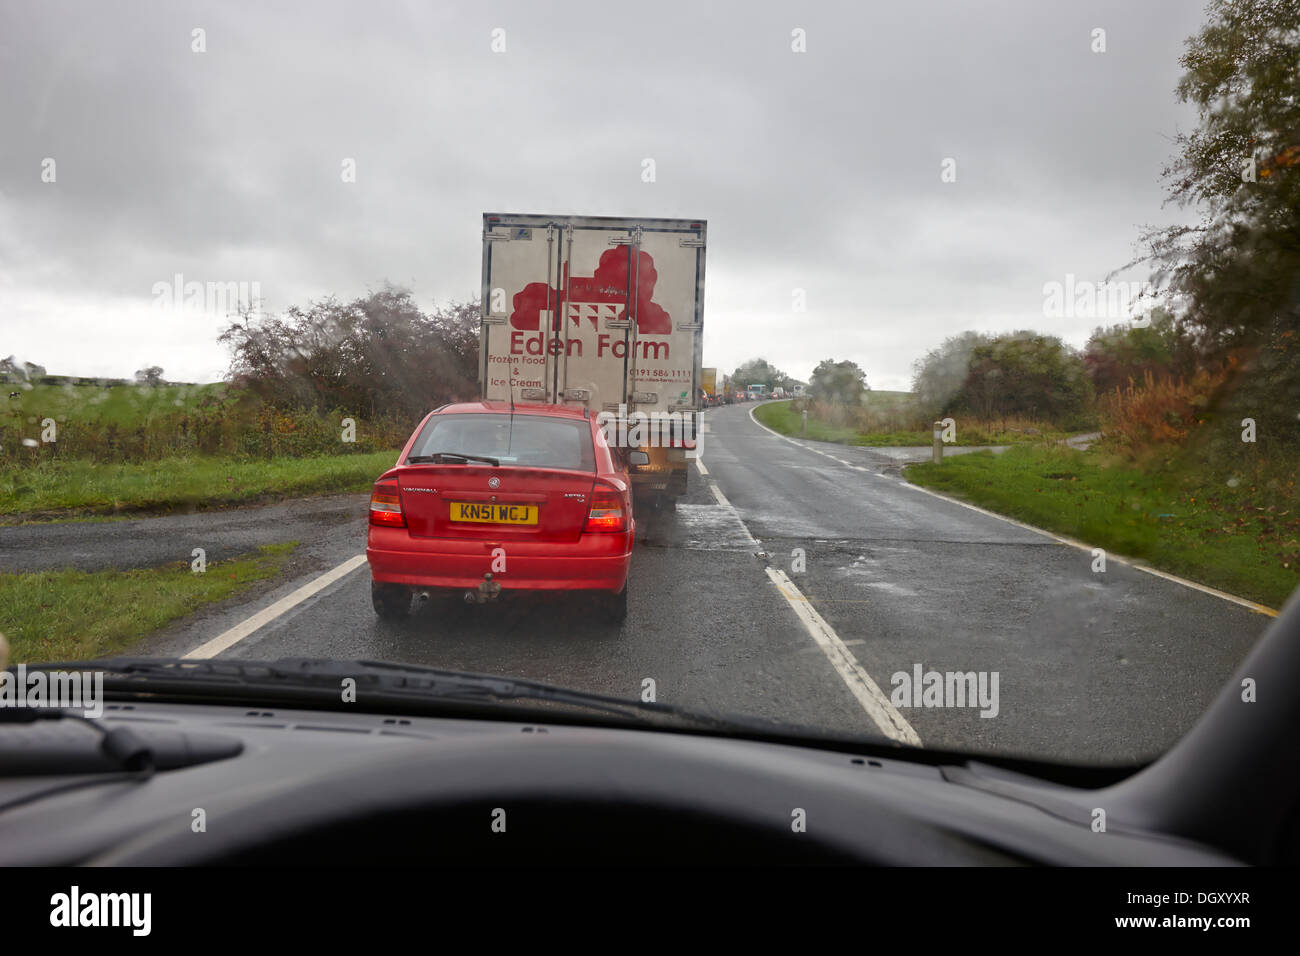 long queue of traffic on a75 single carriageway rural road near stranraer in scotland on a rainy day Stock Photo